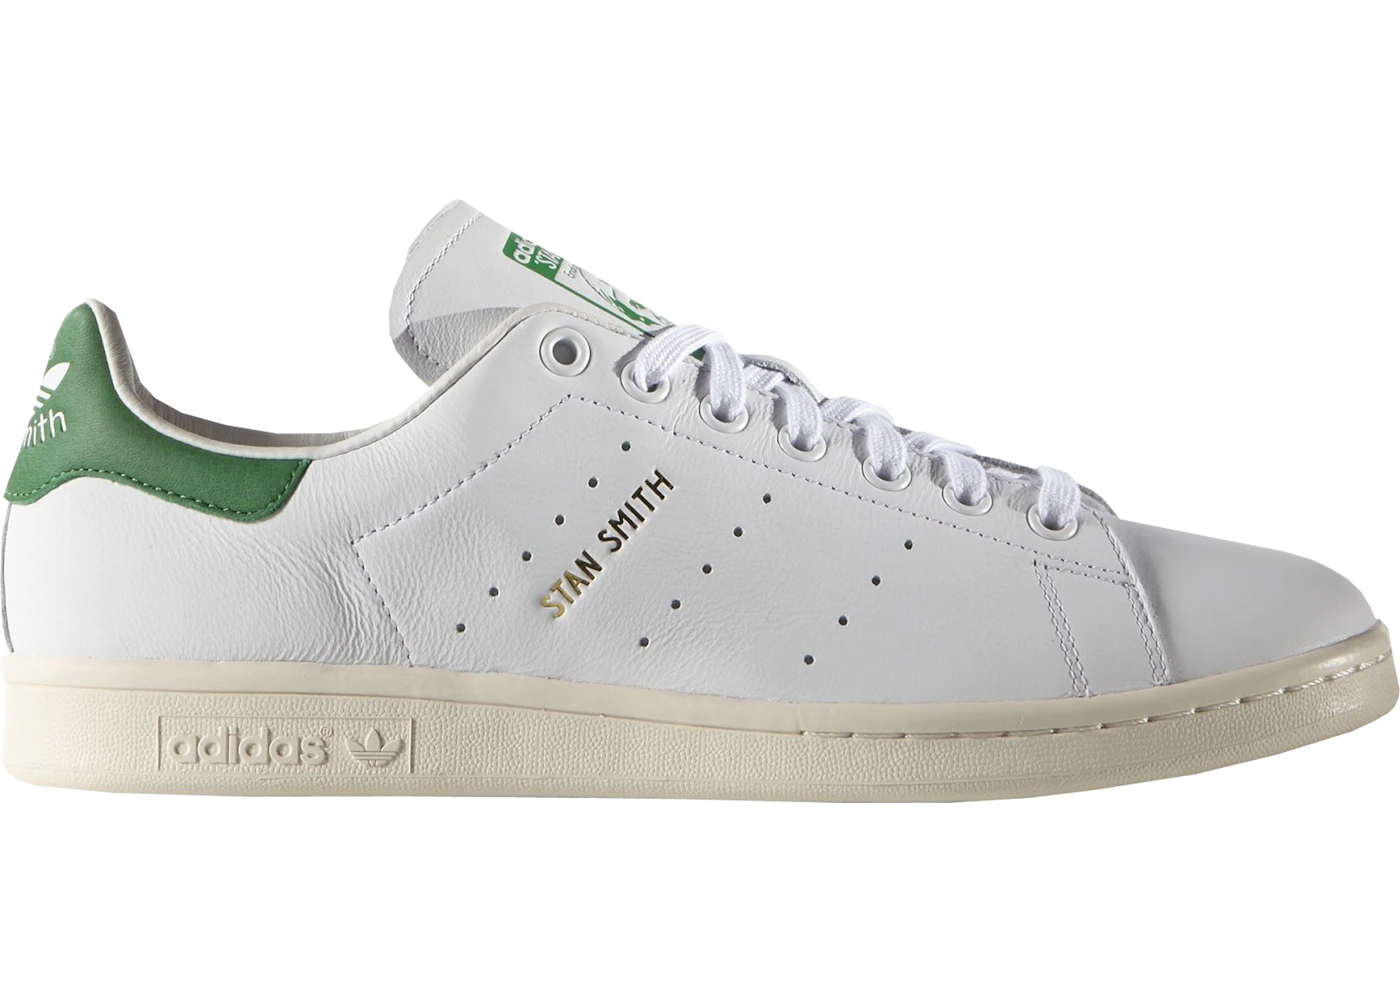 rehearsal Explosives They are adidas Stan Smith Vintage OG Green - S75074 - US